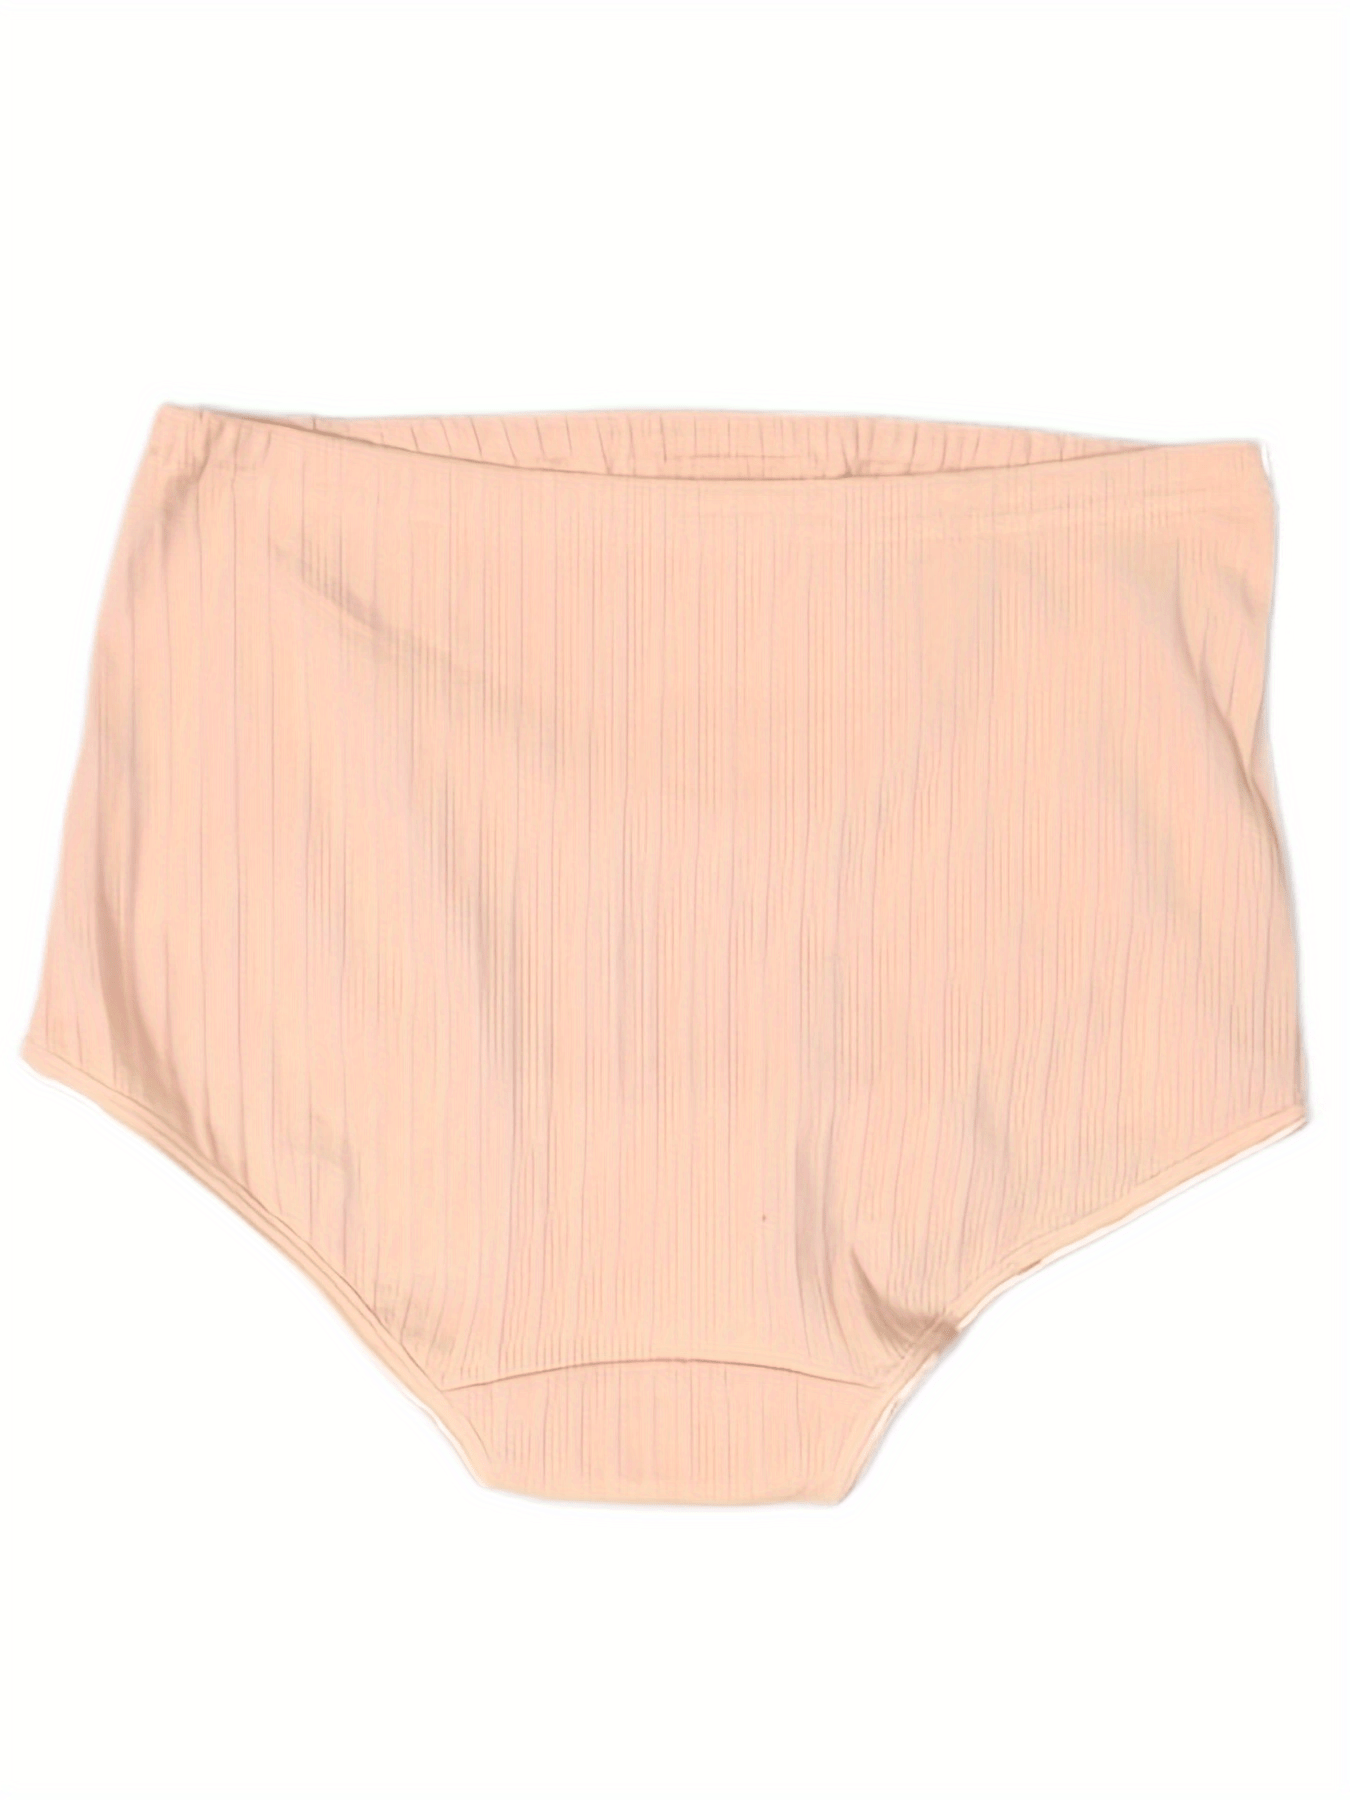 Breathable High Waist Cotton Maternity Panties With Abdominal